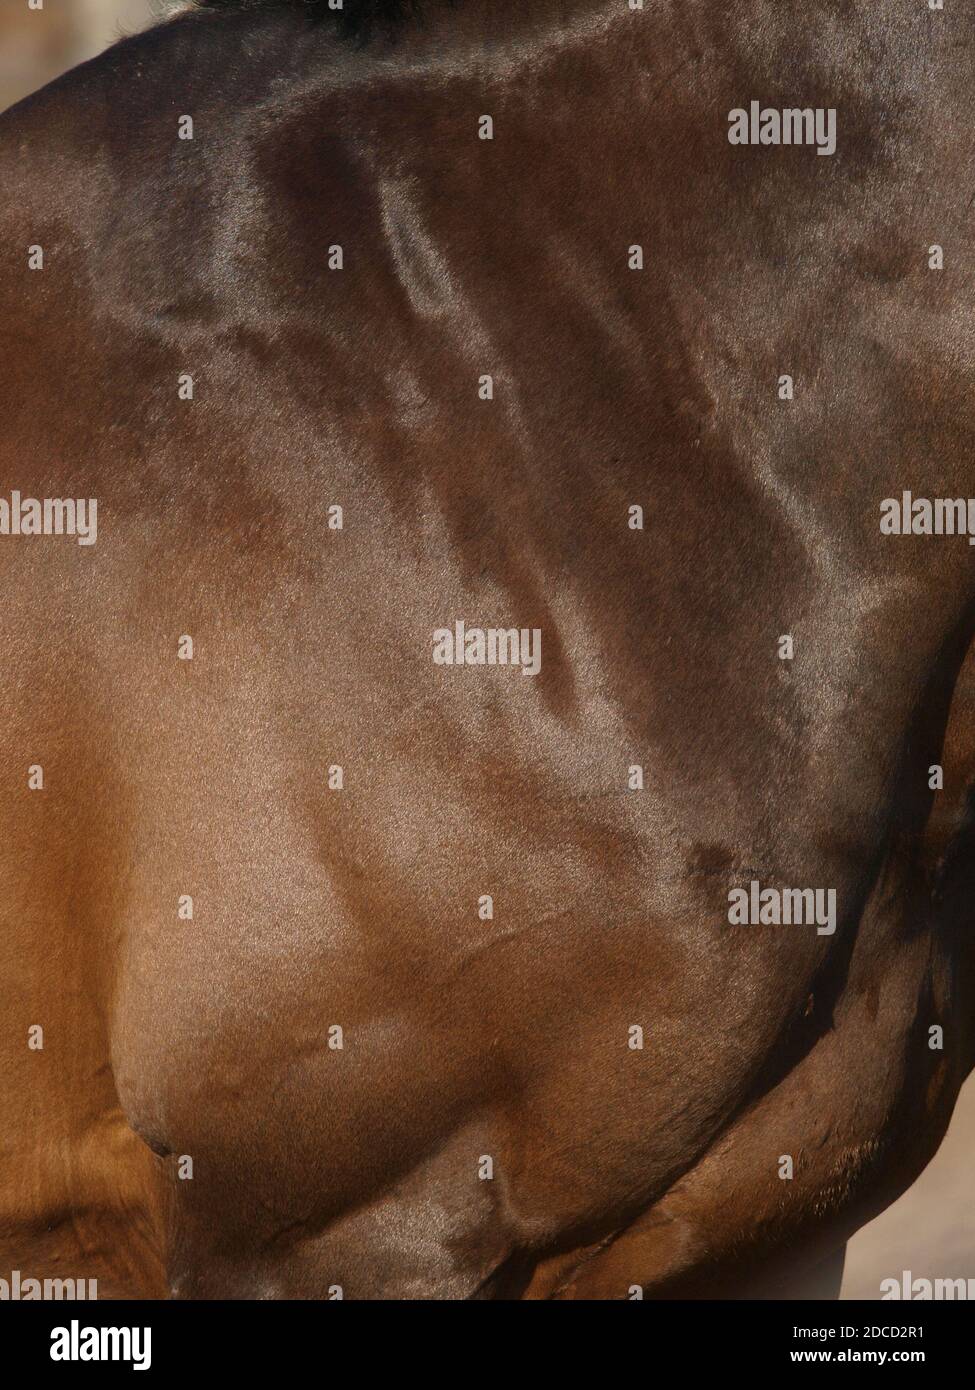 An abstract of the side of a horse showing a healthy shine on its coat and condition. Stock Photo